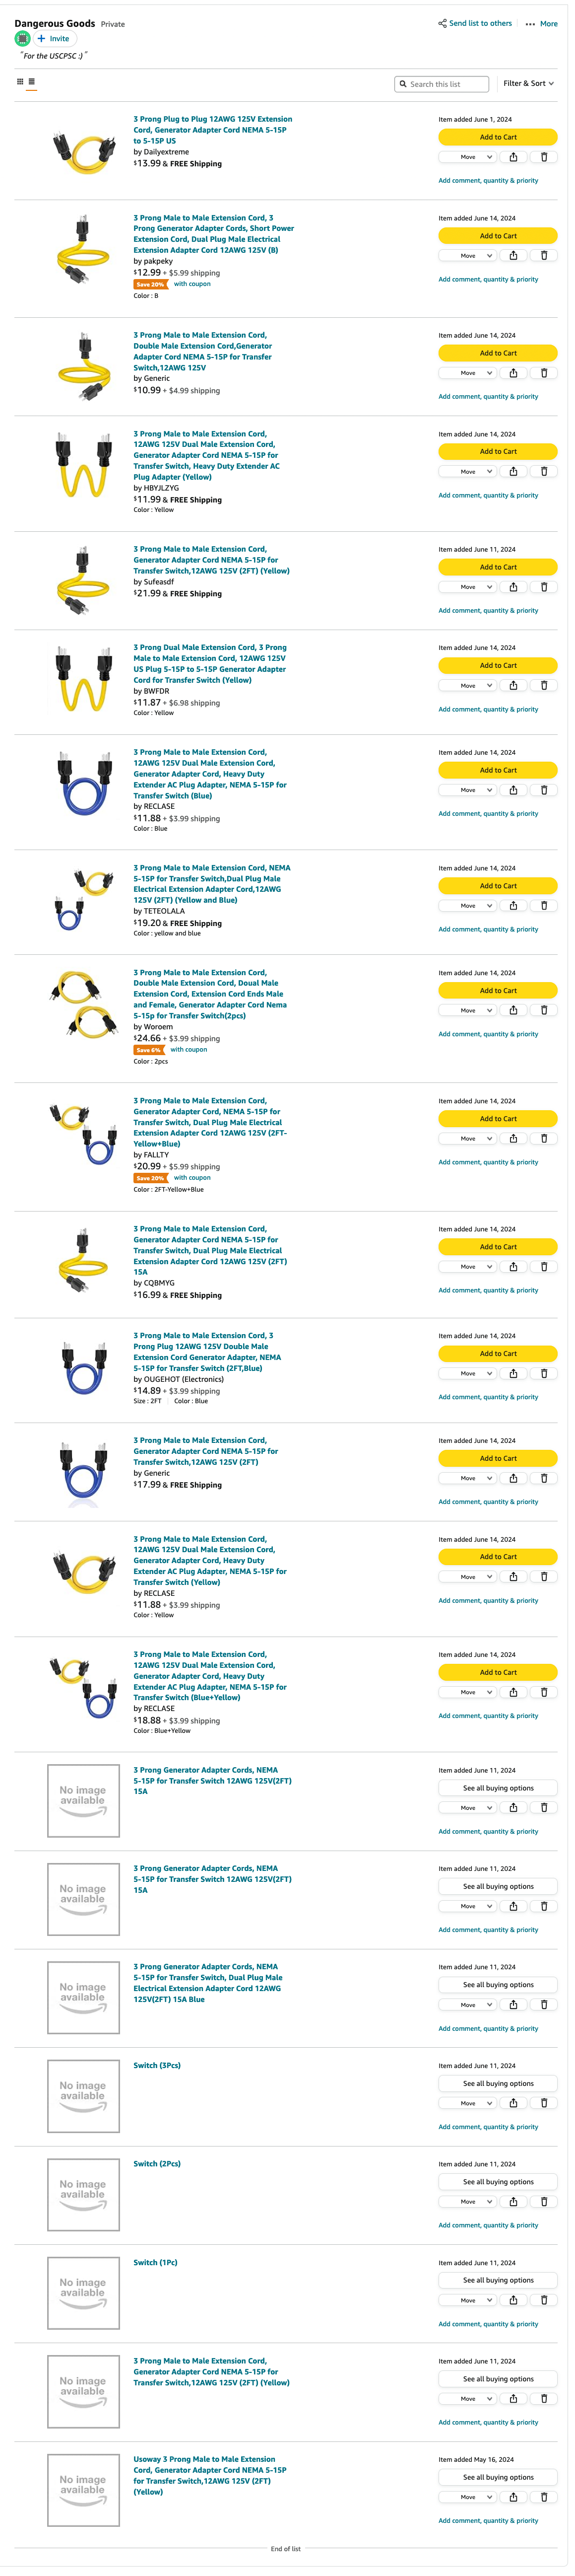 screenshot of amazon product list, 8/23 unavailable, 15/23 suicide cords available.